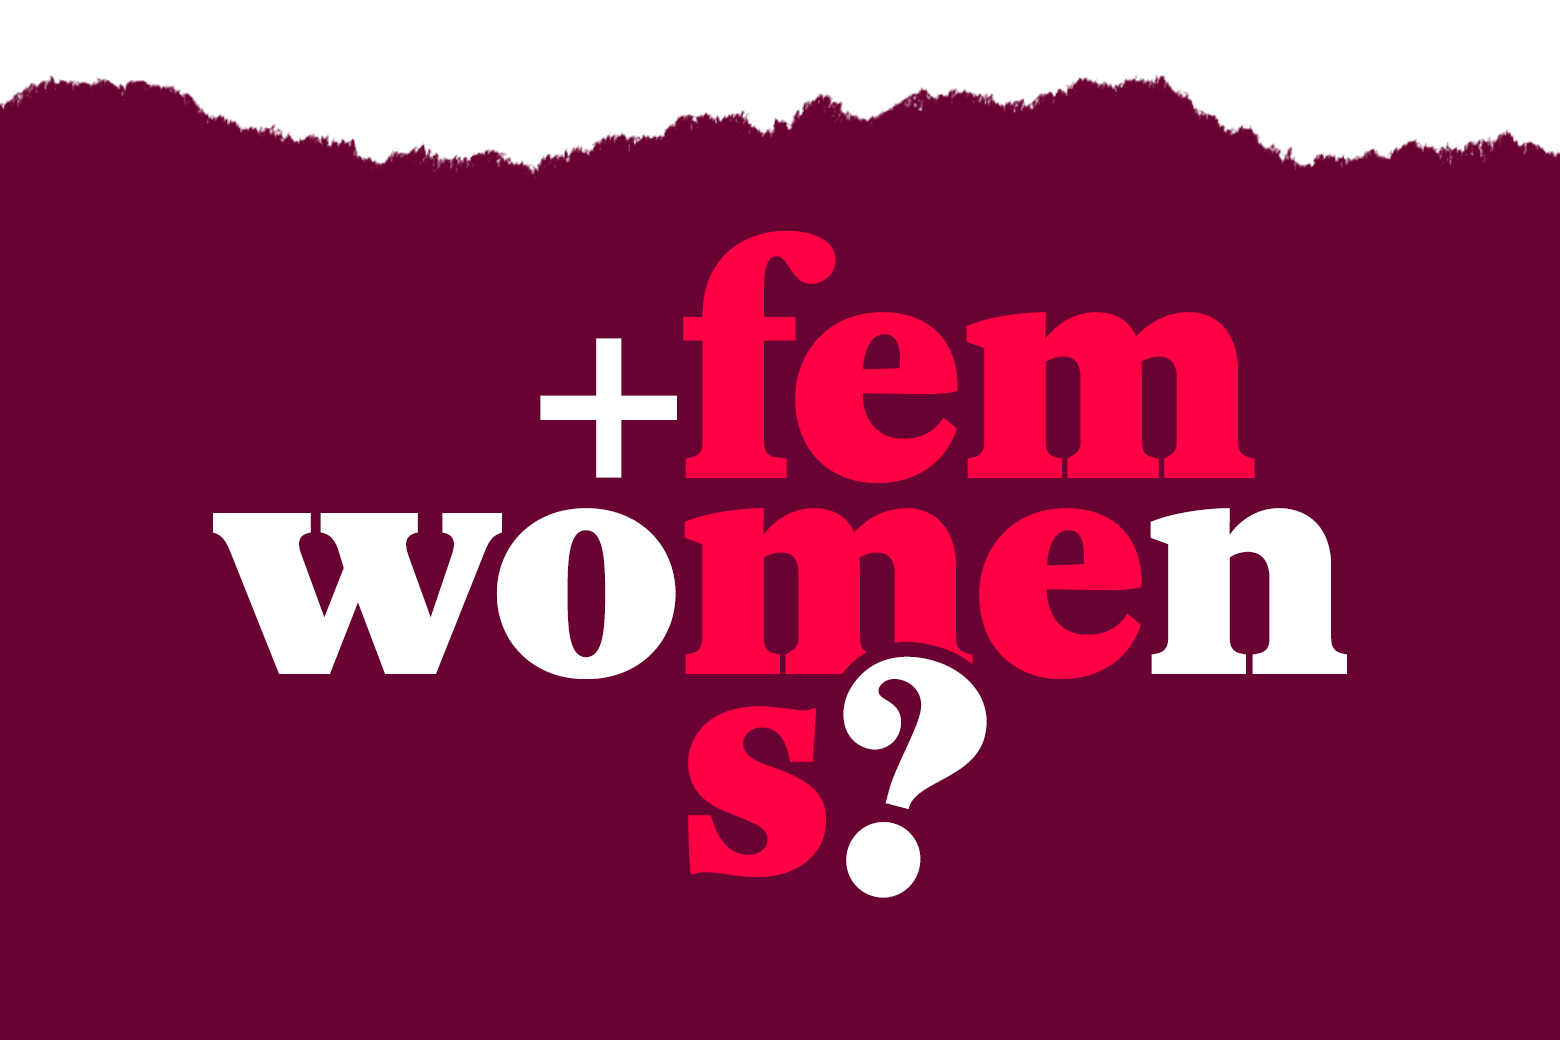 An art treatment studying the phrase "women and femmes."